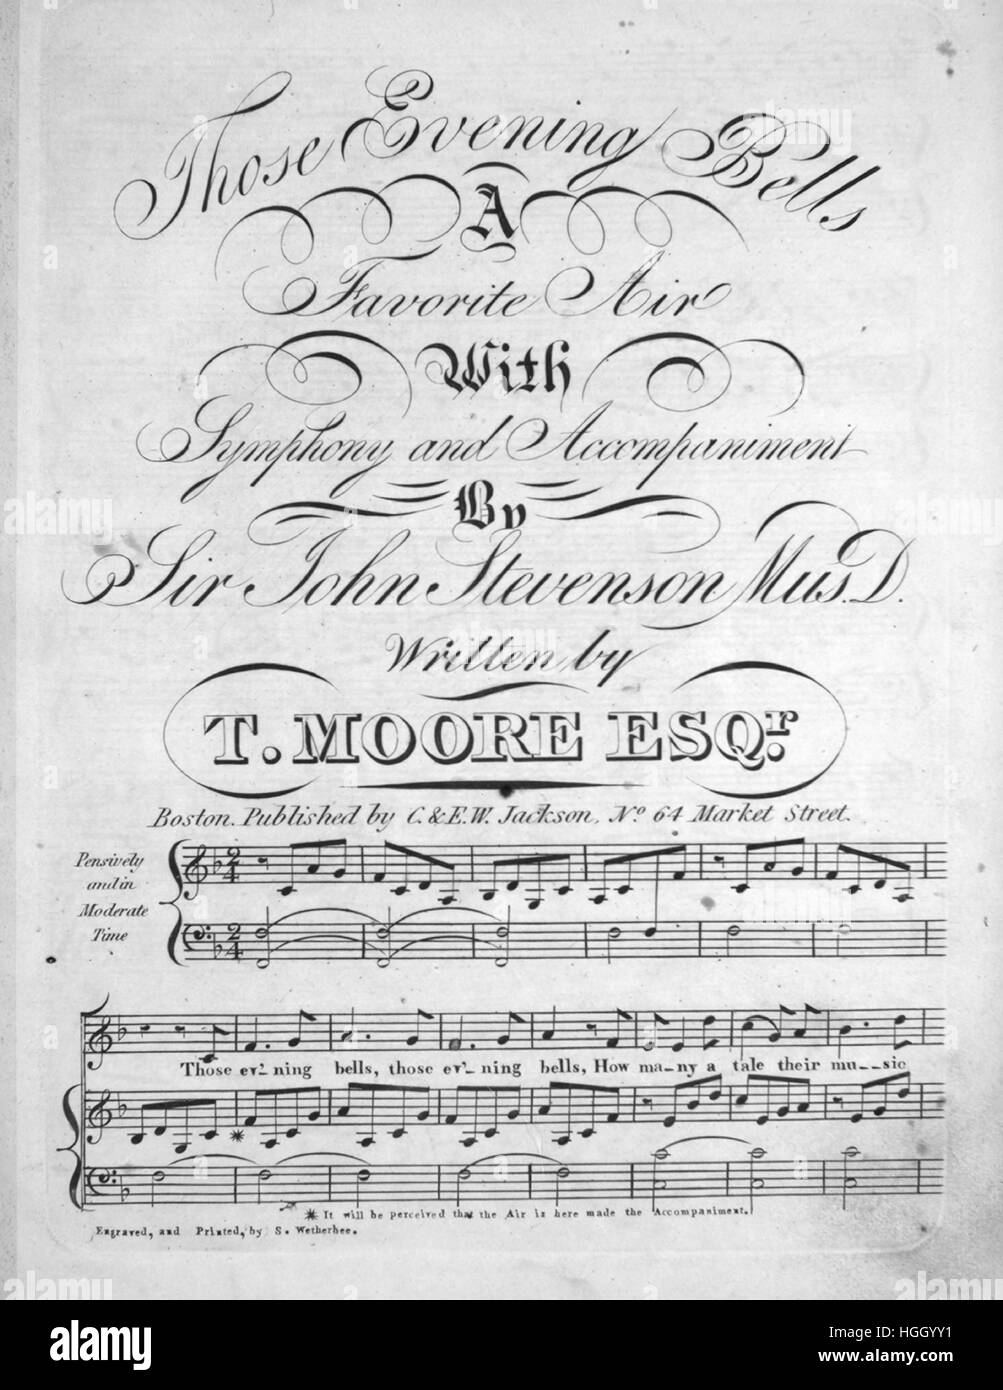 Sheet music cover image of the song 'Those Evening Bells A Favorite Air With Symphonies and Accompaniments', with original authorship notes reading 'By Sir John Stevenson, Mus D Written by T Moore, Esqr', United States, 1900. The publisher is listed as 'C. and E.W. Jackson, No. 64 Market Street', the form of composition is 'strophic', the instrumentation is 'piano and voice', the first line reads 'Those ev'ning bells, those ev'ning bells, how many a tale their music tells', and the illustration artist is listed as 'Engraved, and Printed by S. Wetherbee.'. Stock Photo